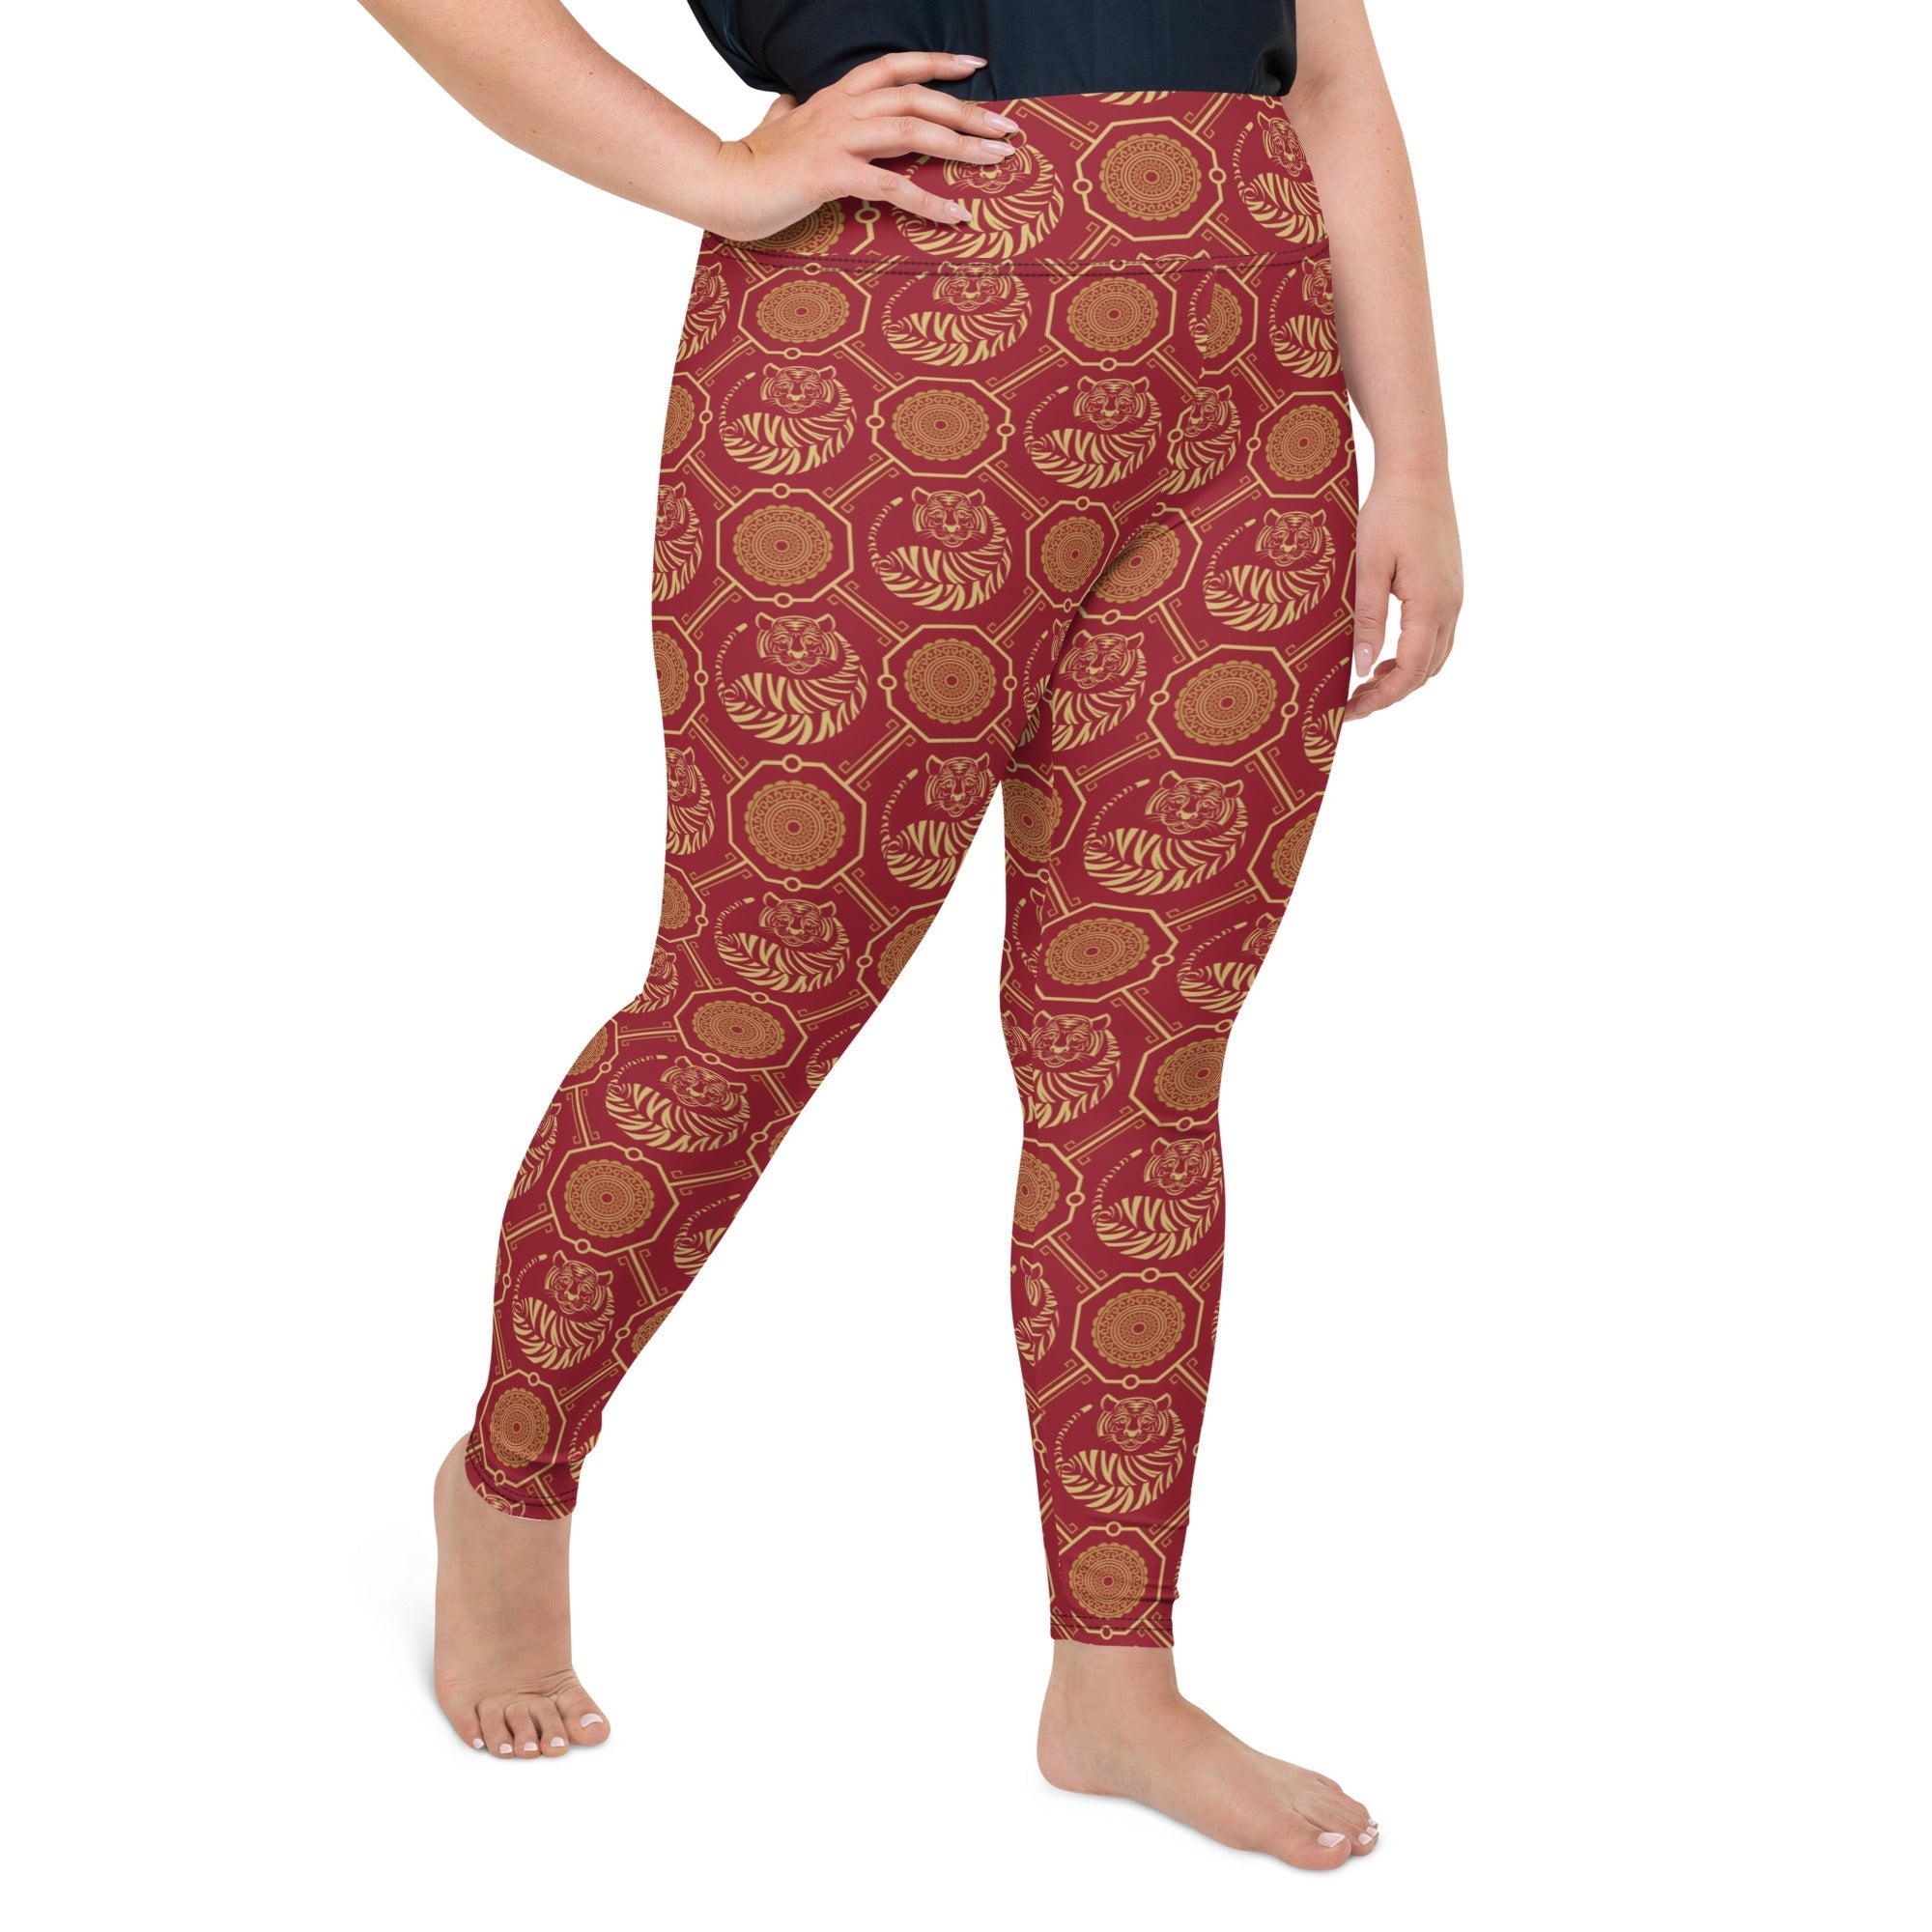 Chinese New Year Plus Size Leggings